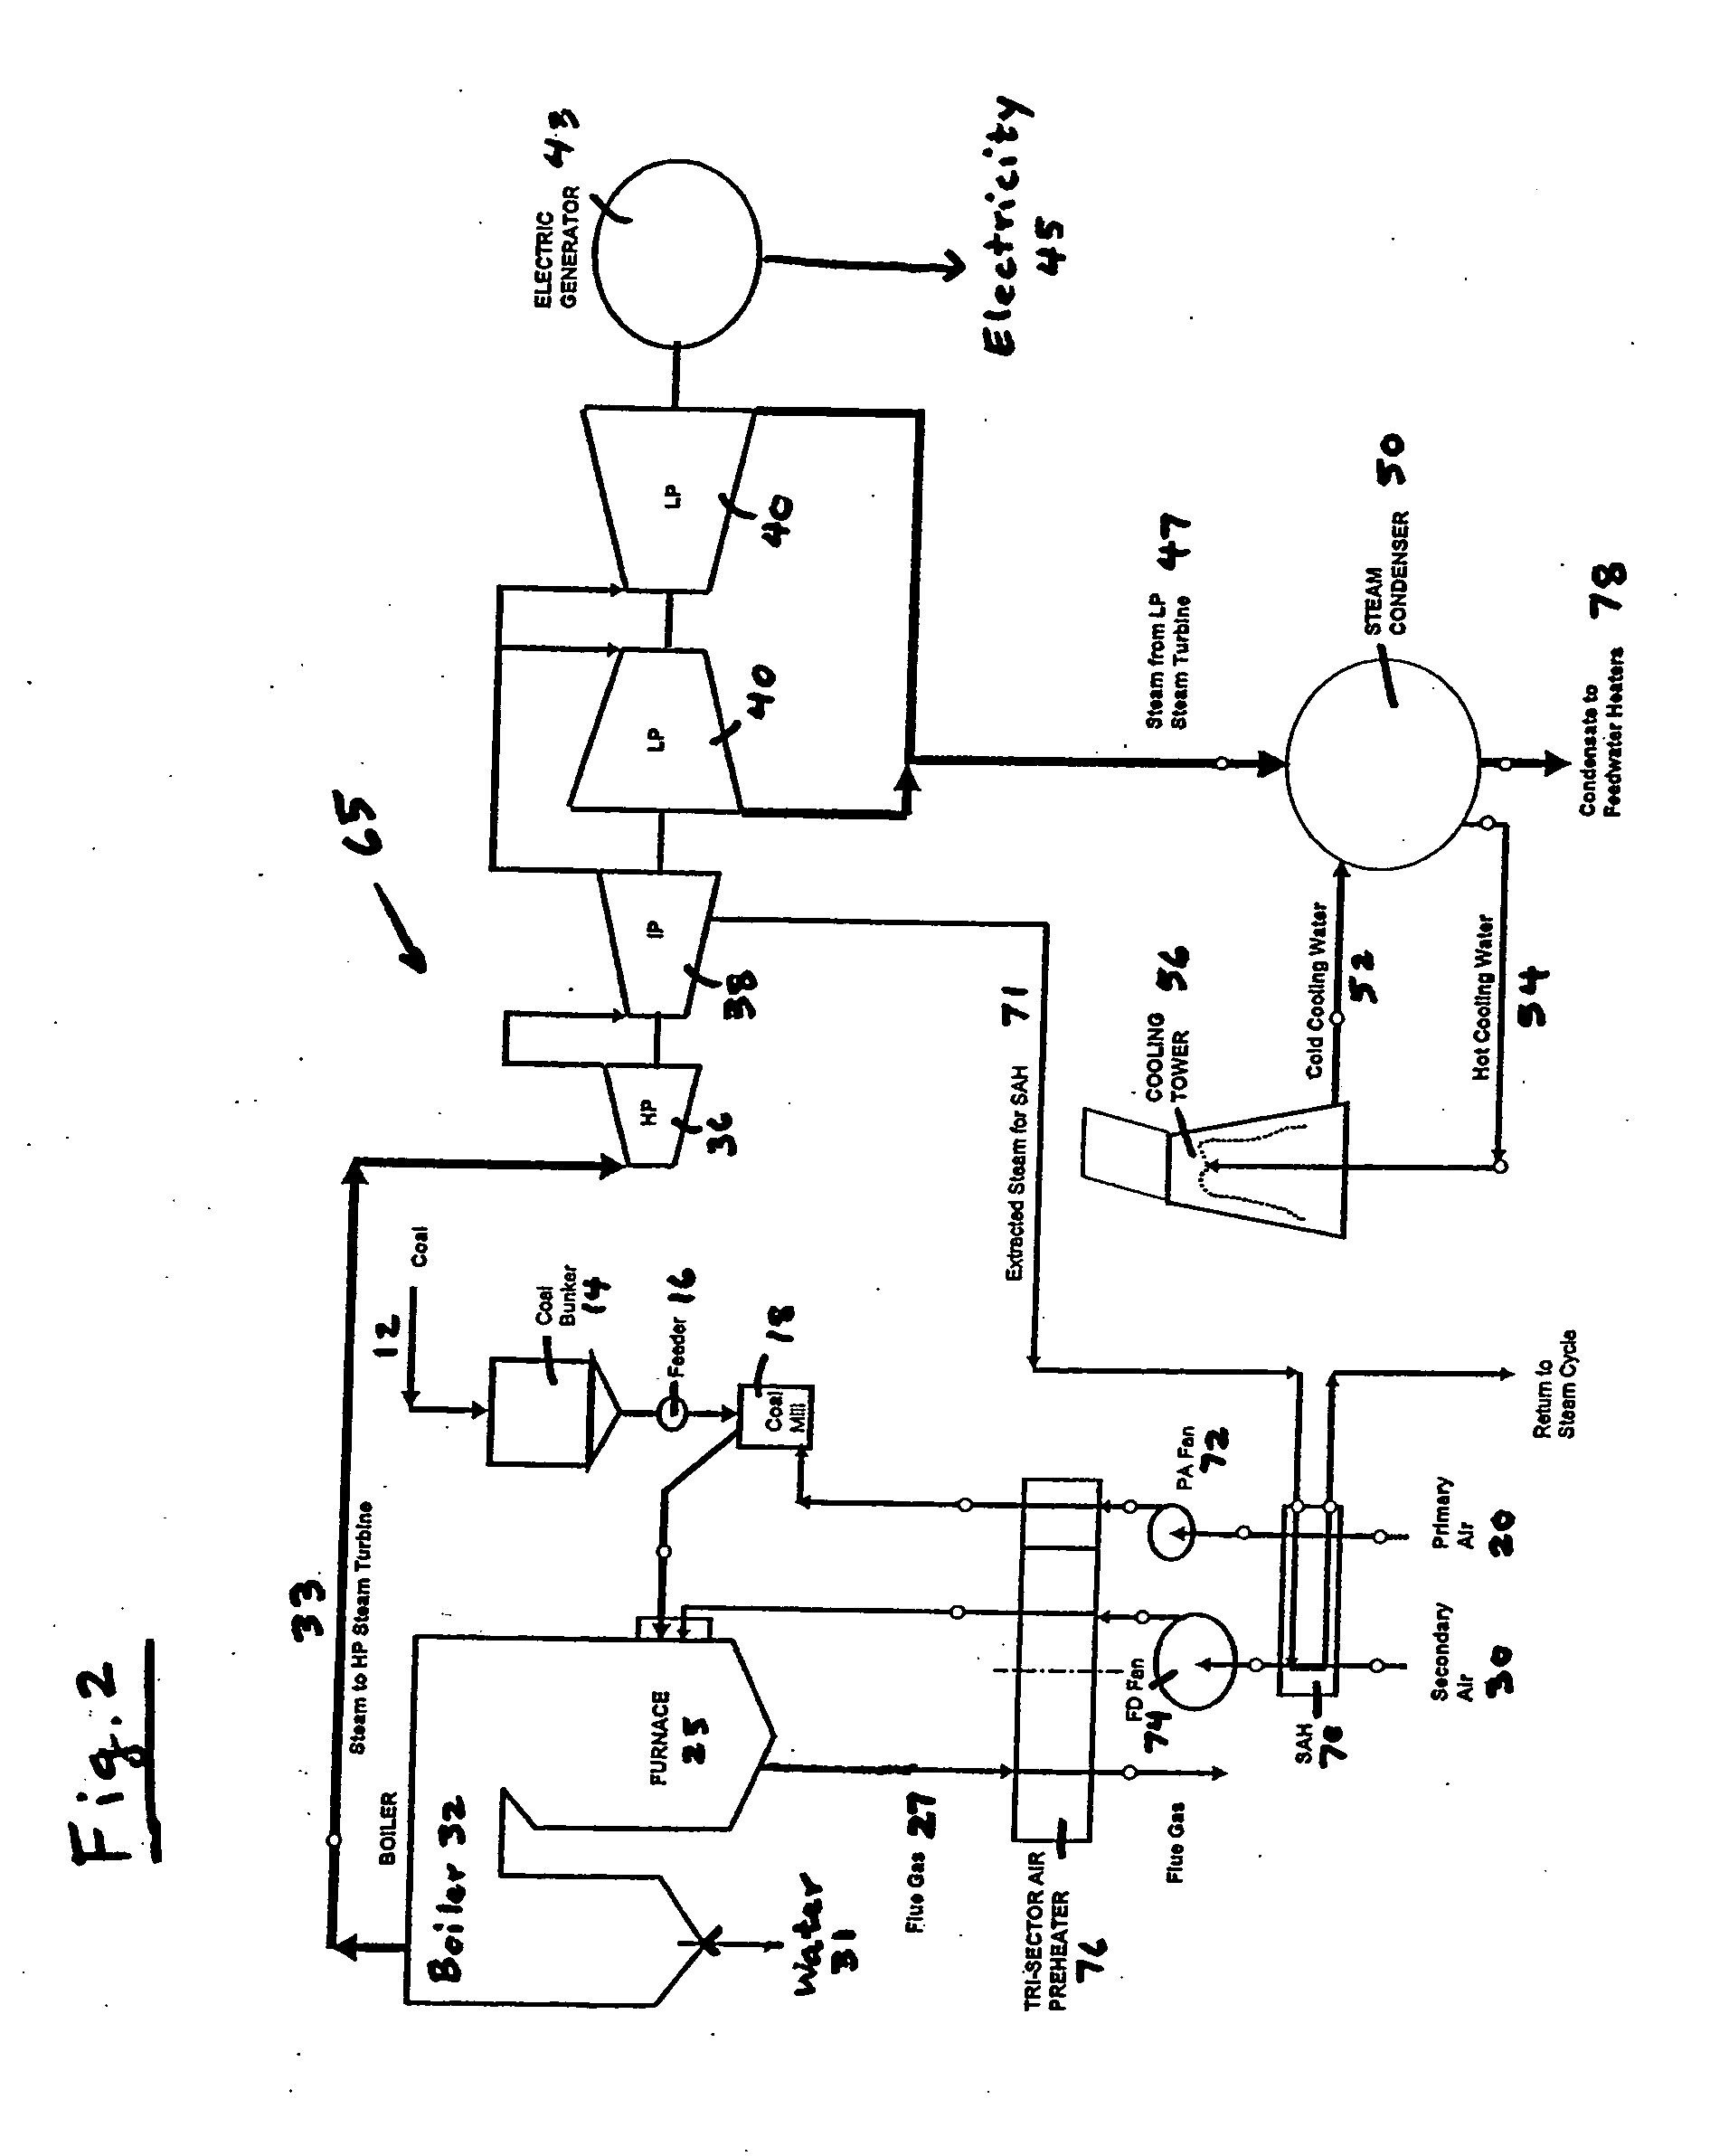 Method of enhancing the quality of high-moisture materials using system heat sources